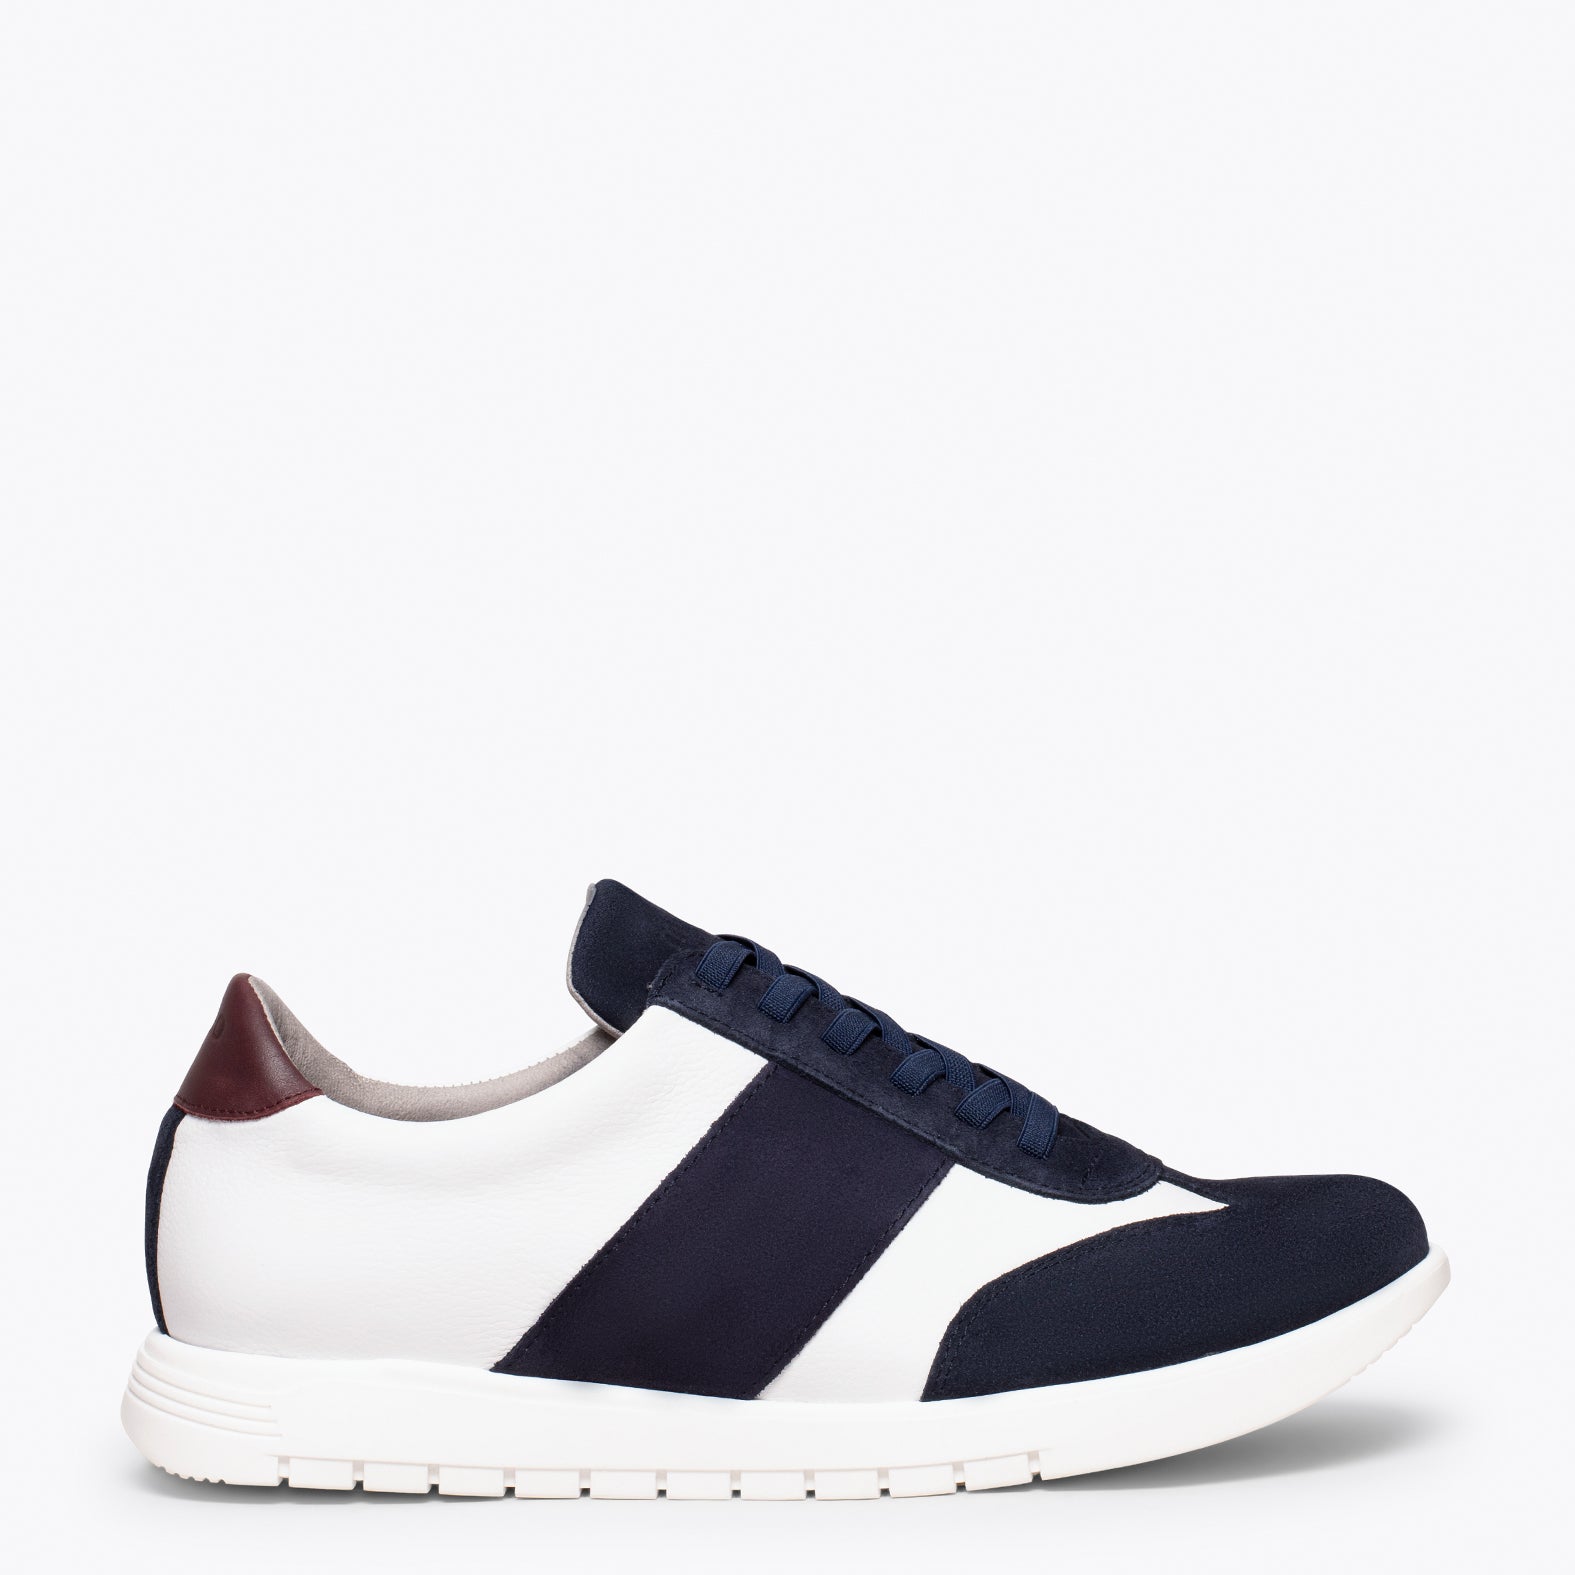 SPORT  - WHITE AND NAVY mixed leather sneaker for men